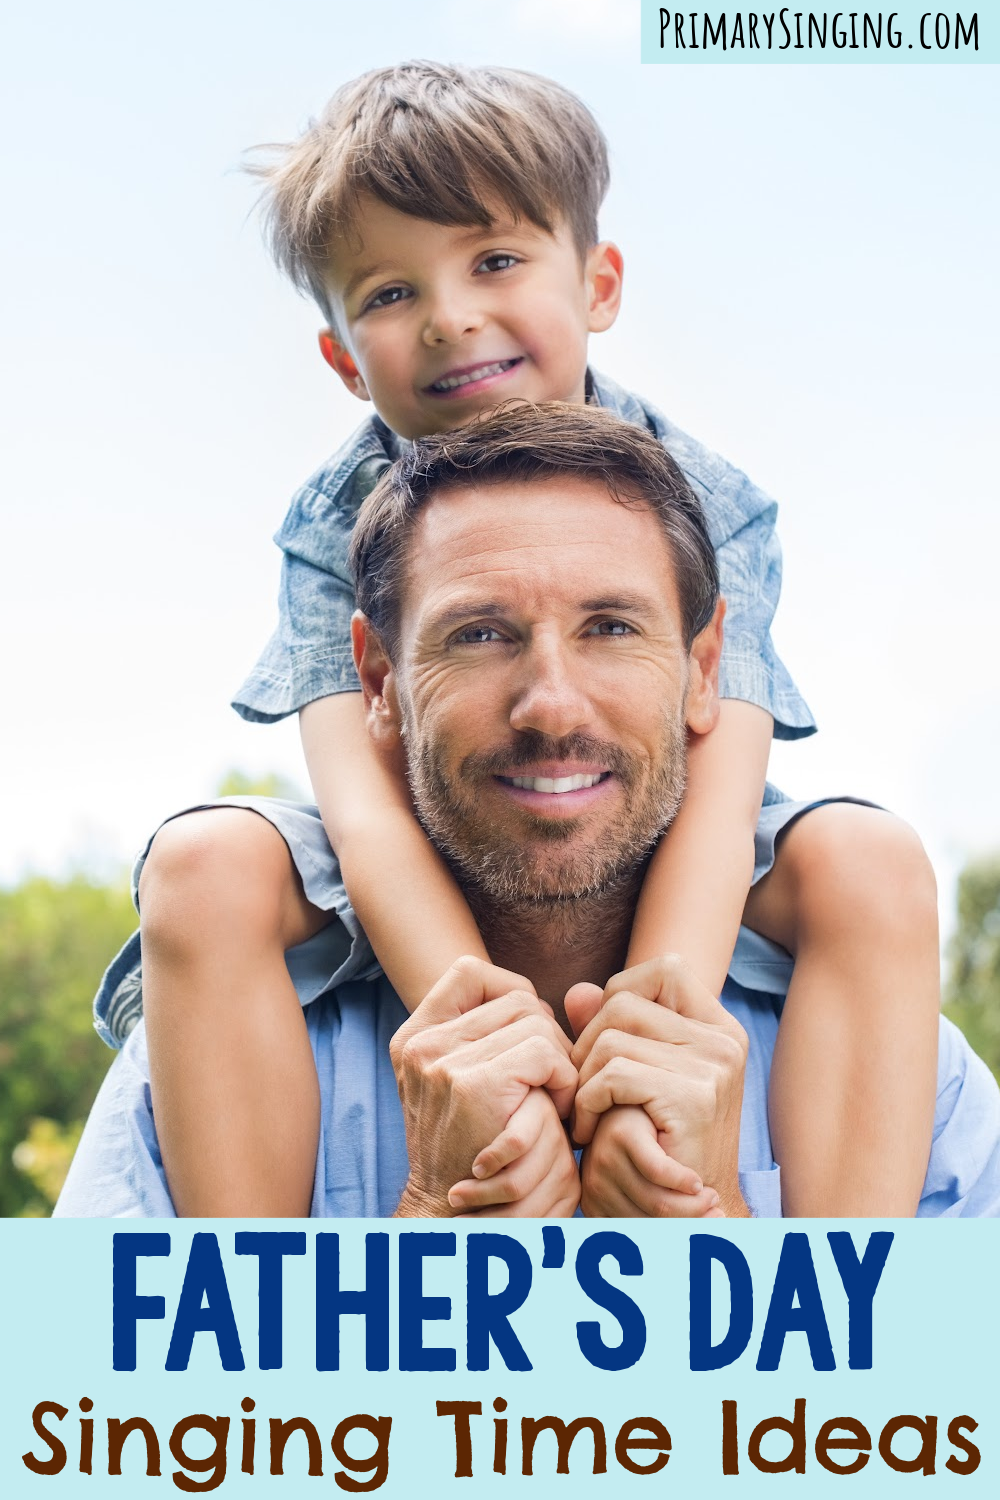 23+ Father's Day singing time ideas! TONS of fun ways to teach whatever Father's Day song you've picked this years with ideas that work for any song plus teaching ideas for specific songs that will be so fun for your Primary kiddos! A great go-to resource for LDS Primary music leaders.